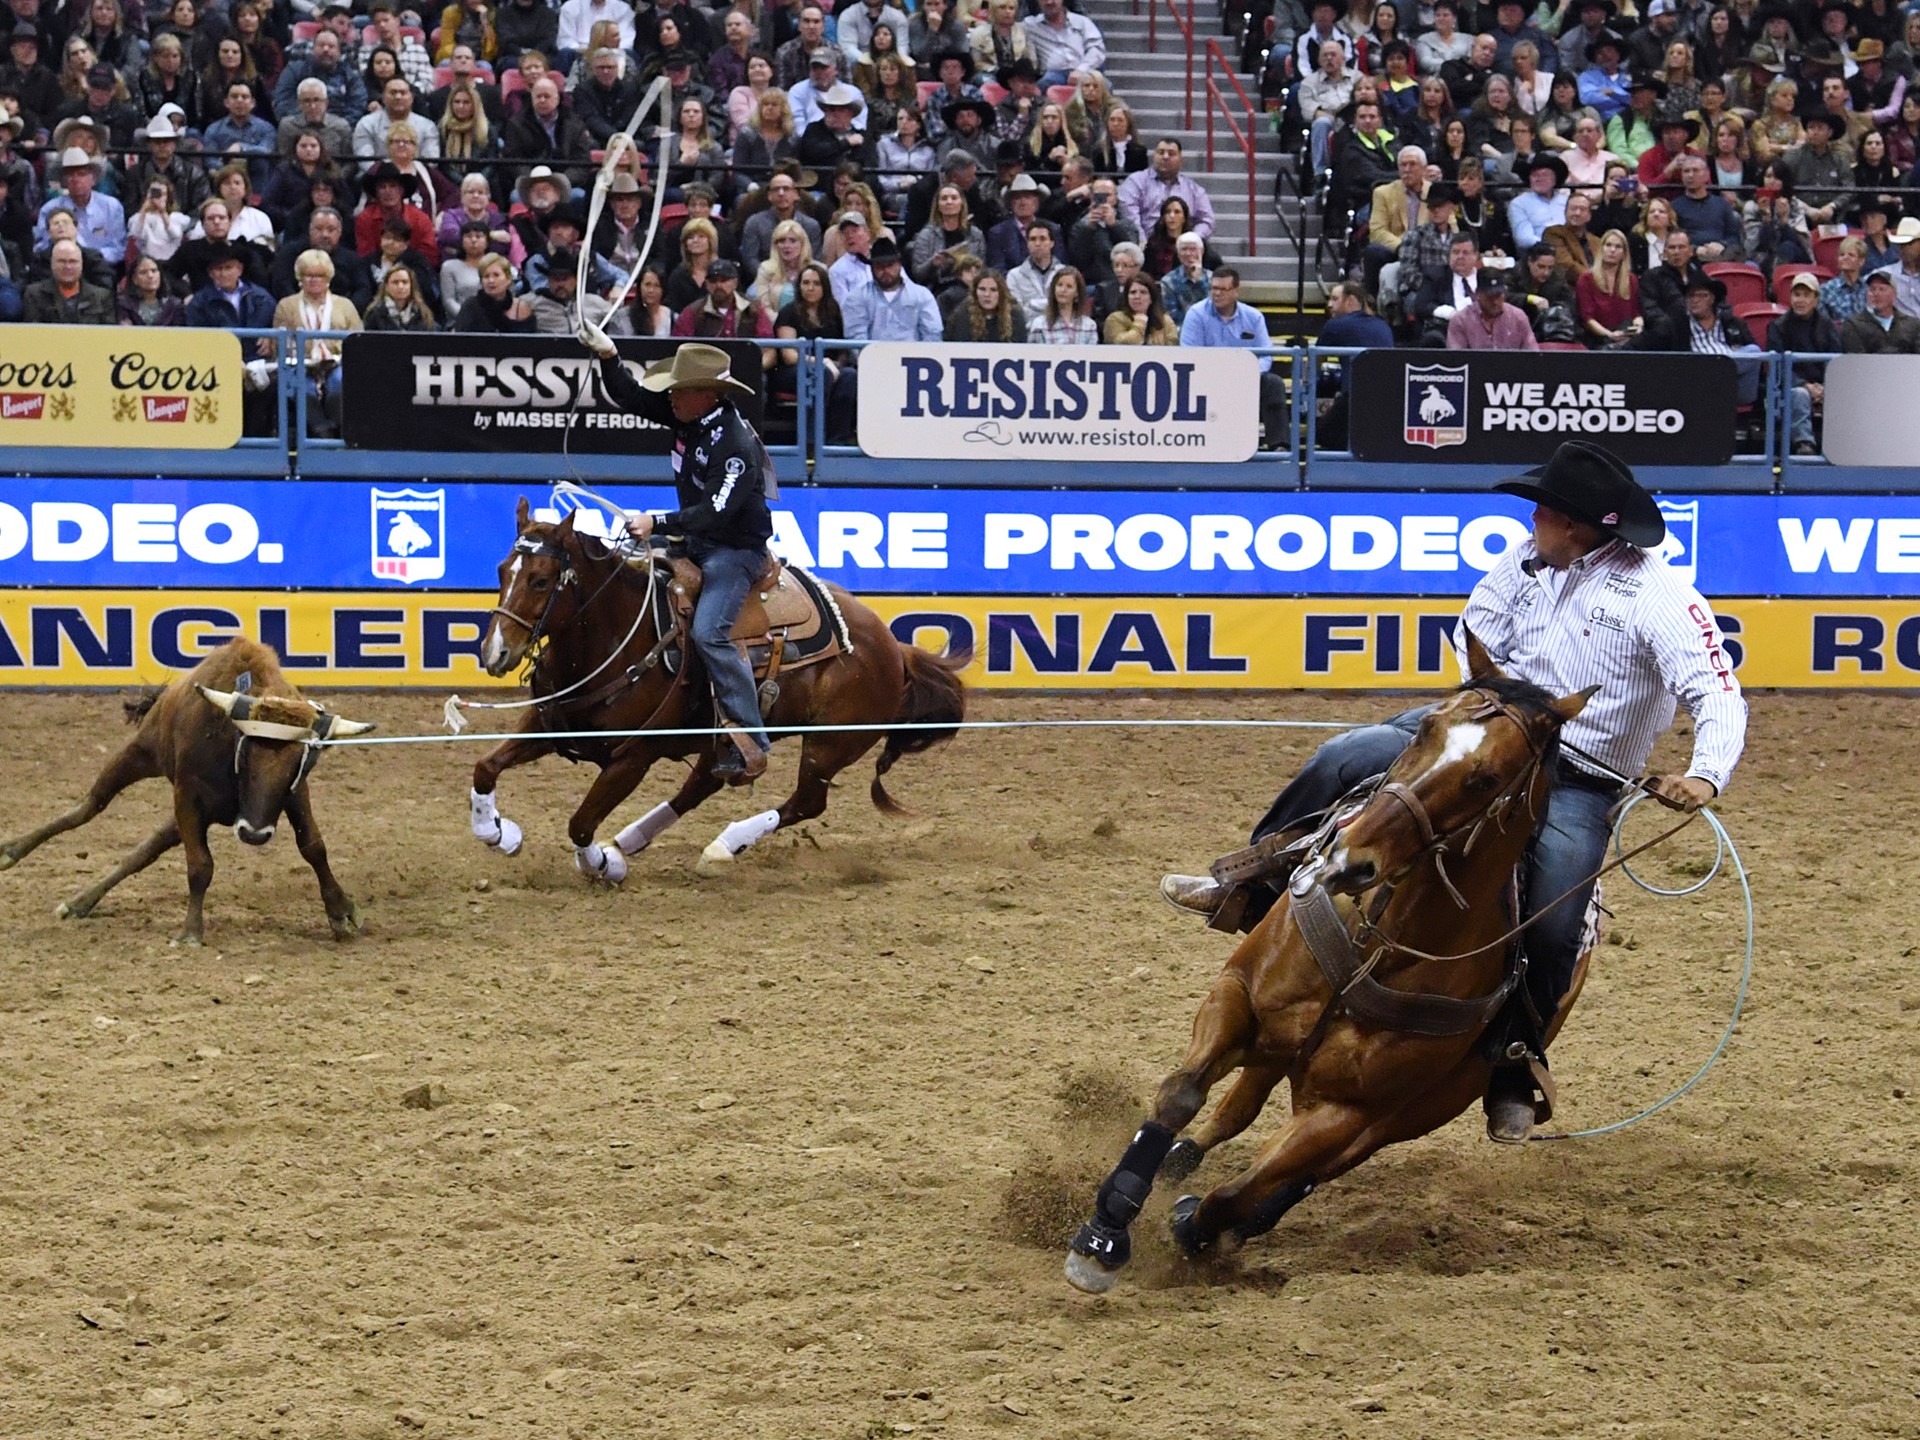 Erich Rogers and Clint Summers compete in team roping